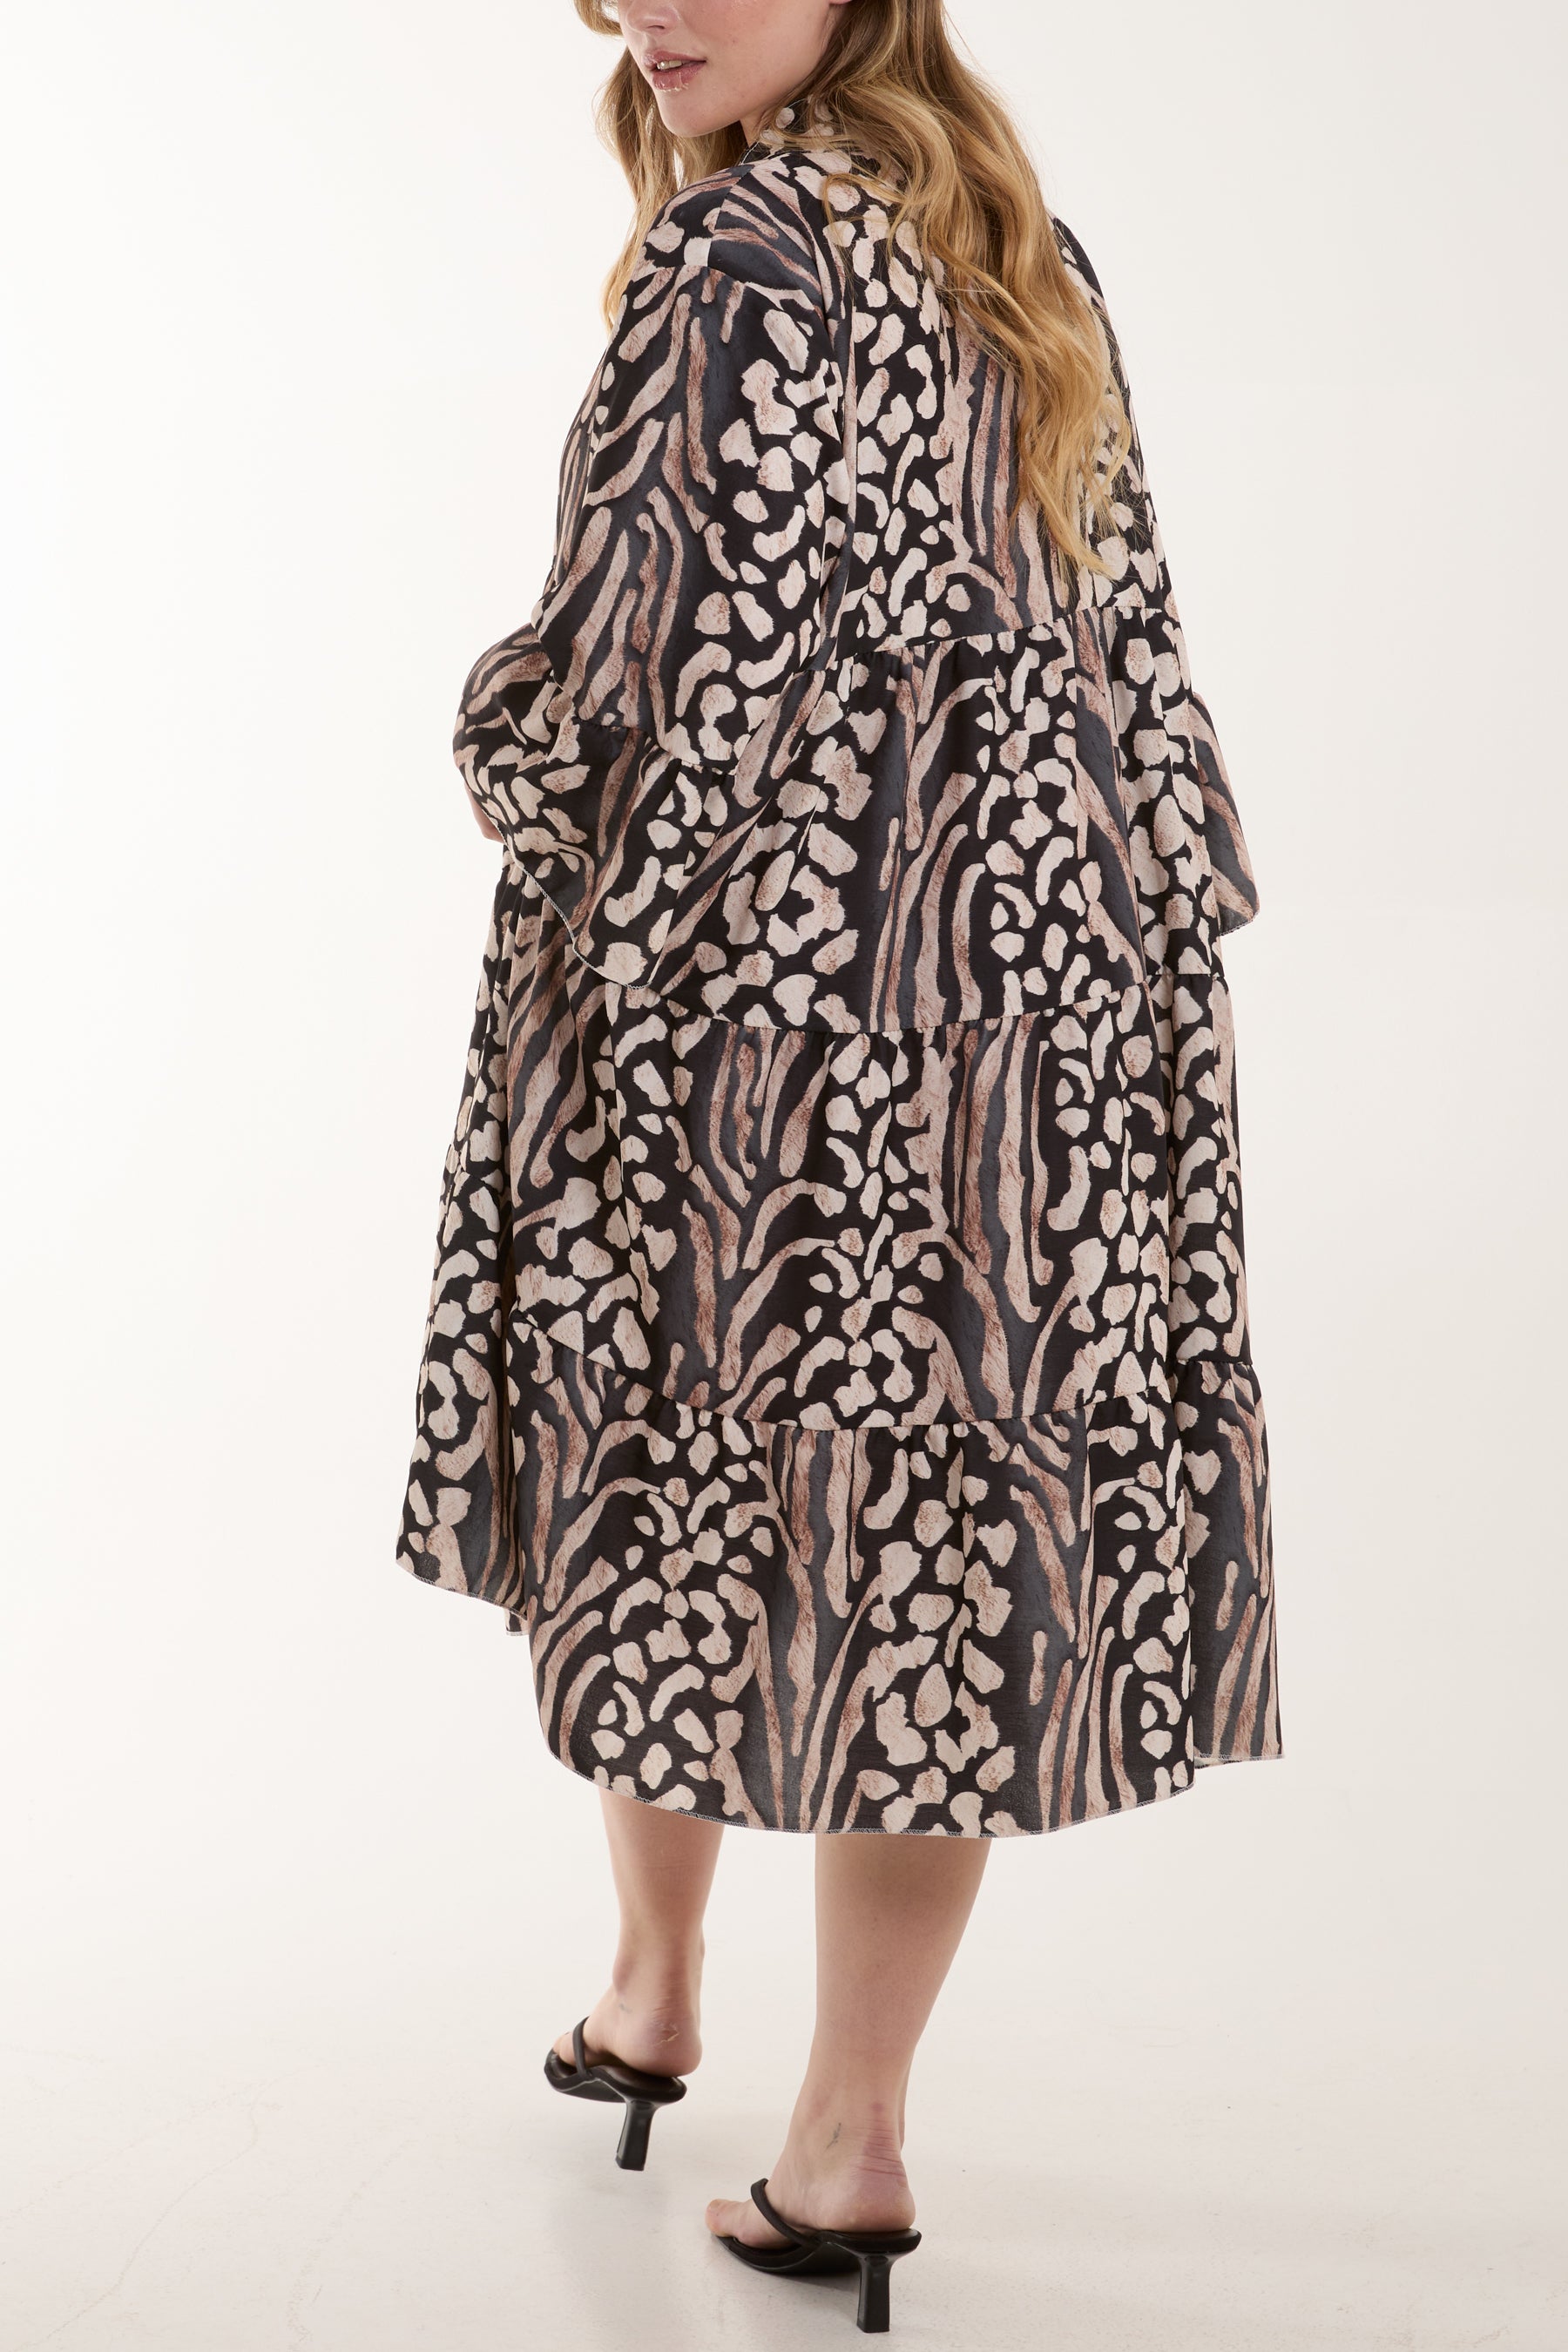 Colourful Leopard Print Tiered Smock Dress